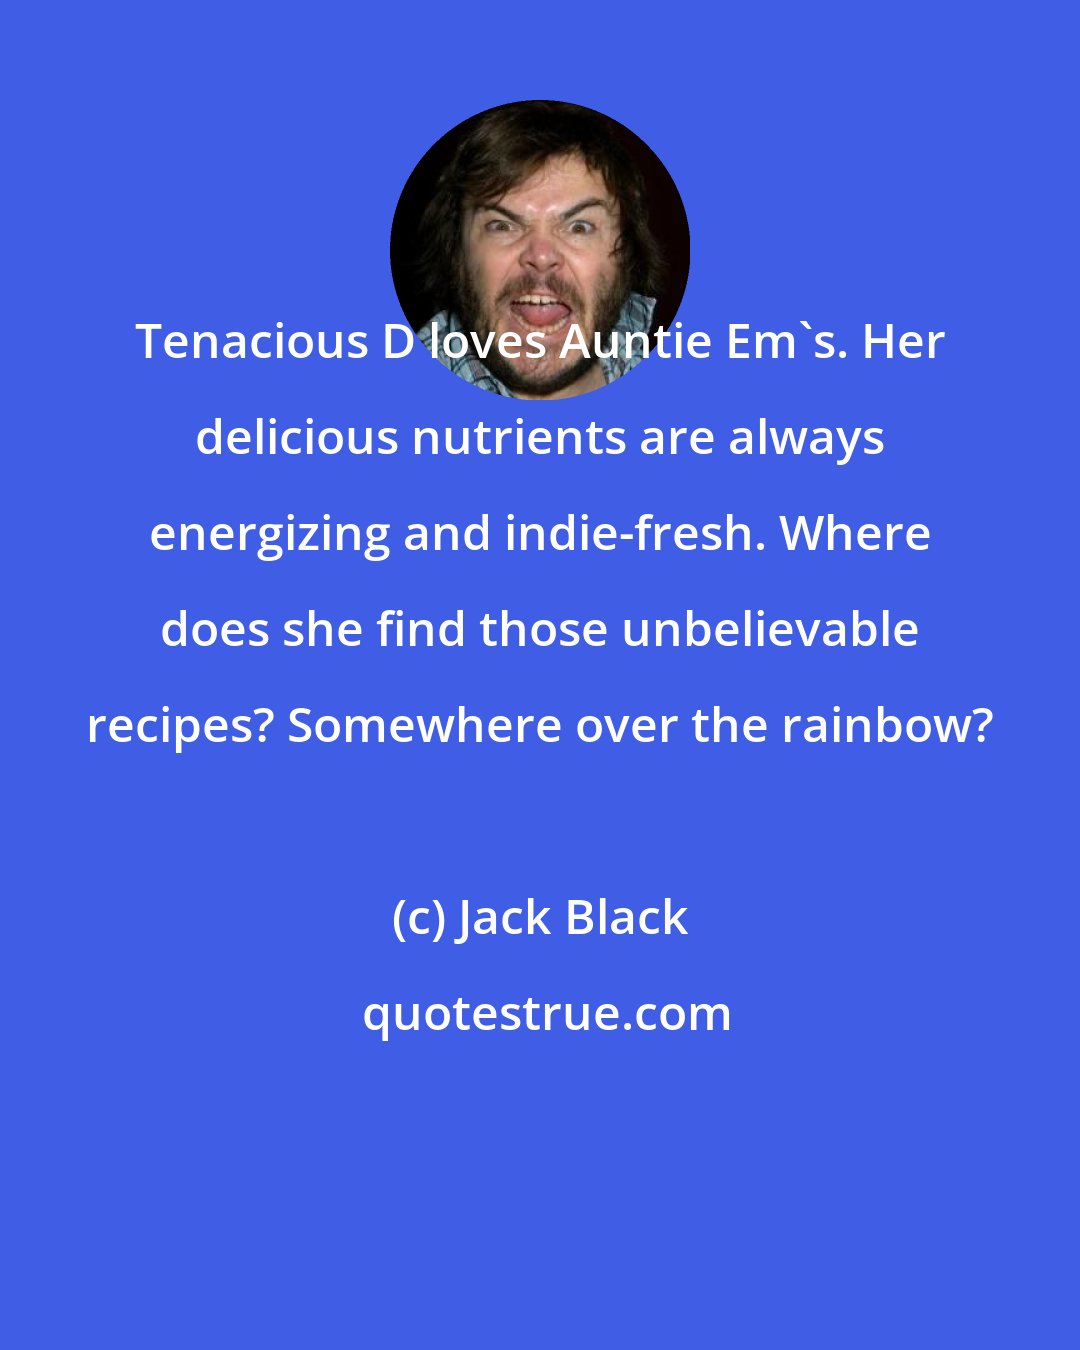 Jack Black: Tenacious D loves Auntie Em's. Her delicious nutrients are always energizing and indie-fresh. Where does she find those unbelievable recipes? Somewhere over the rainbow?